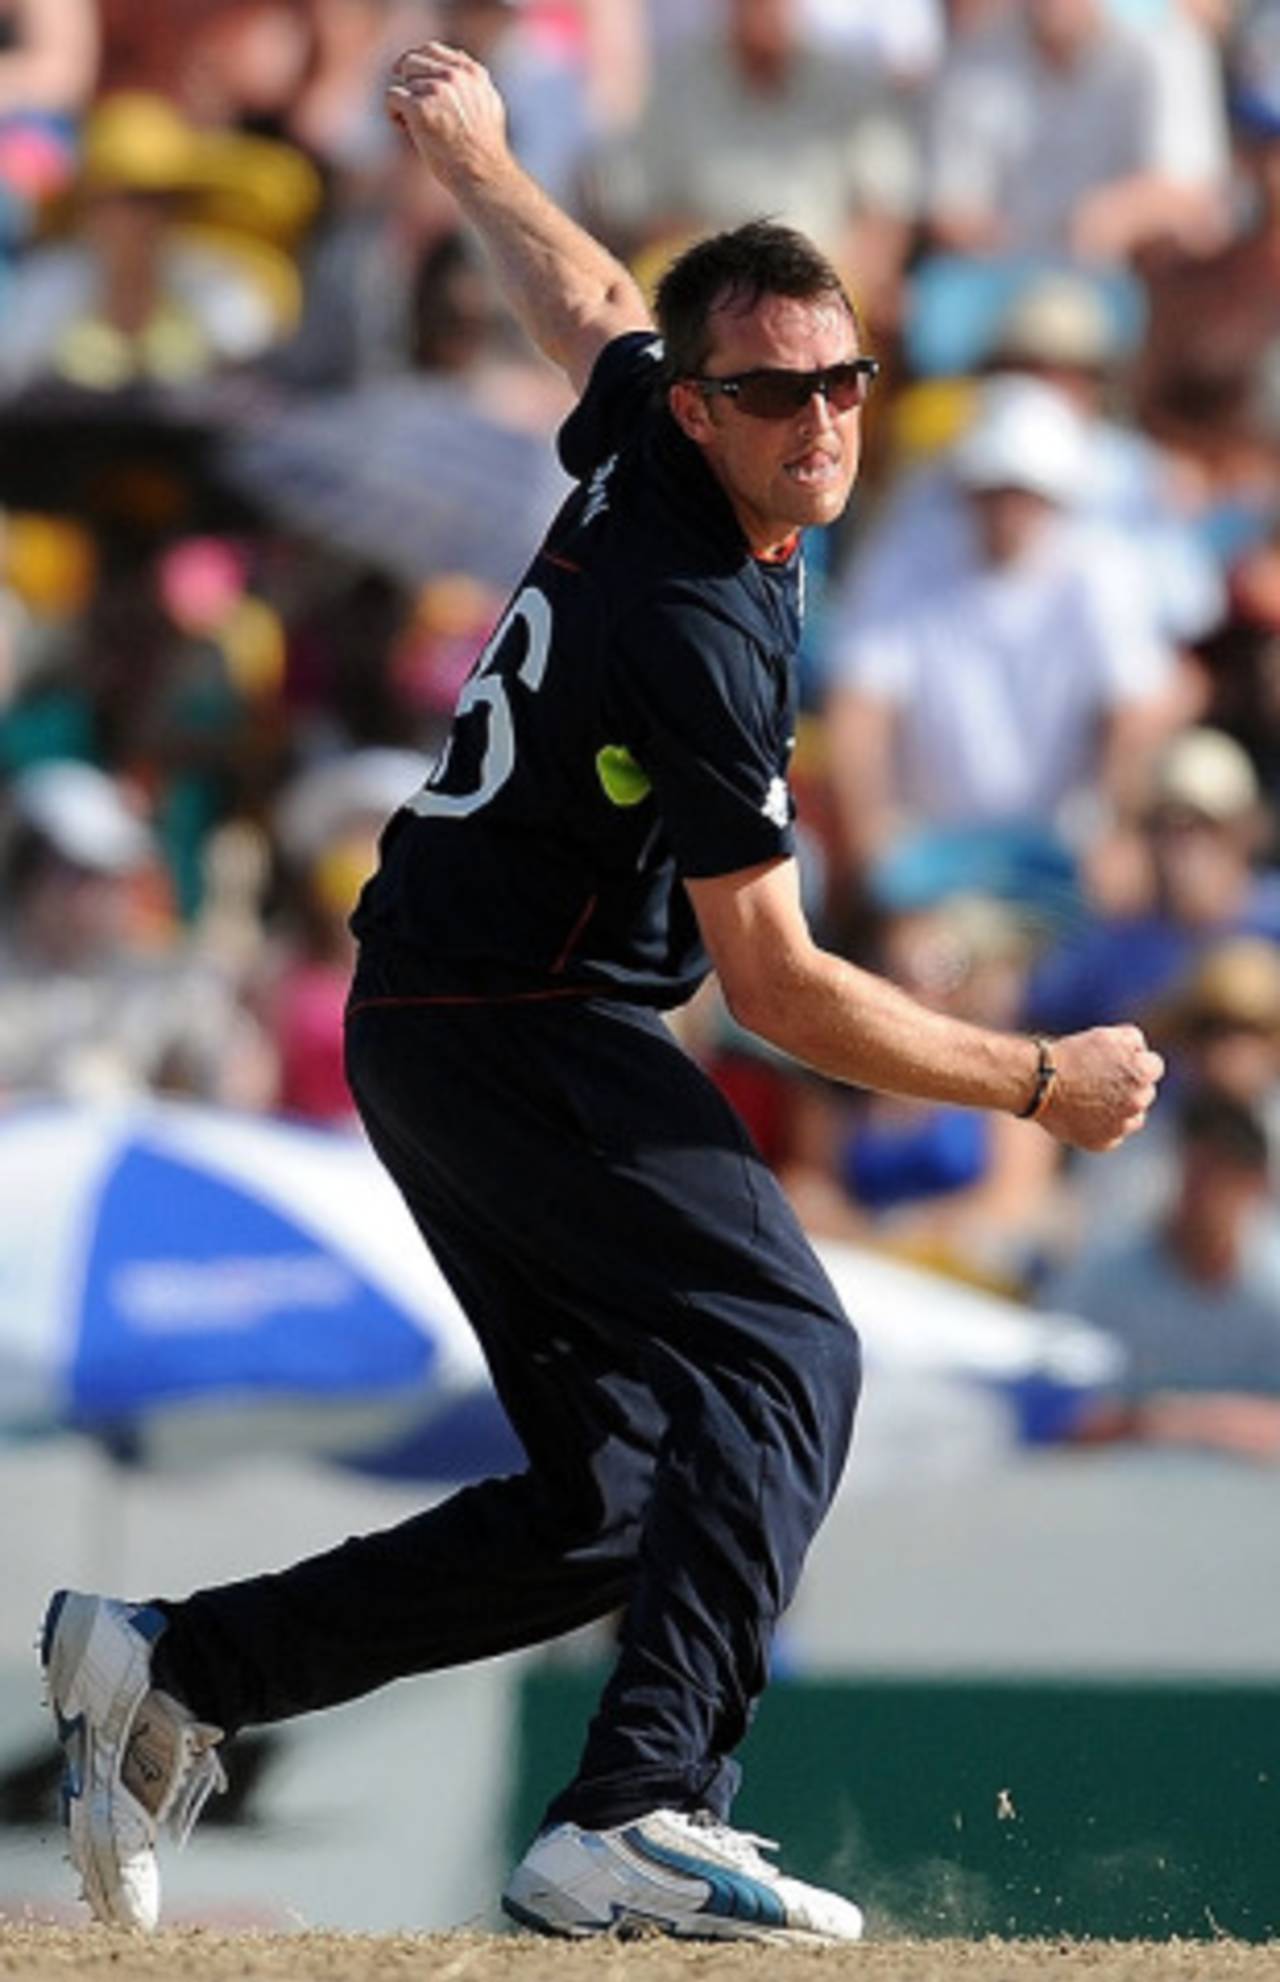 Graeme Swann's three-wicket haul included his first over dismissal of Graeme Smith, England v South Africa, World T20, Group E, Bridgetown, May 8, 2010